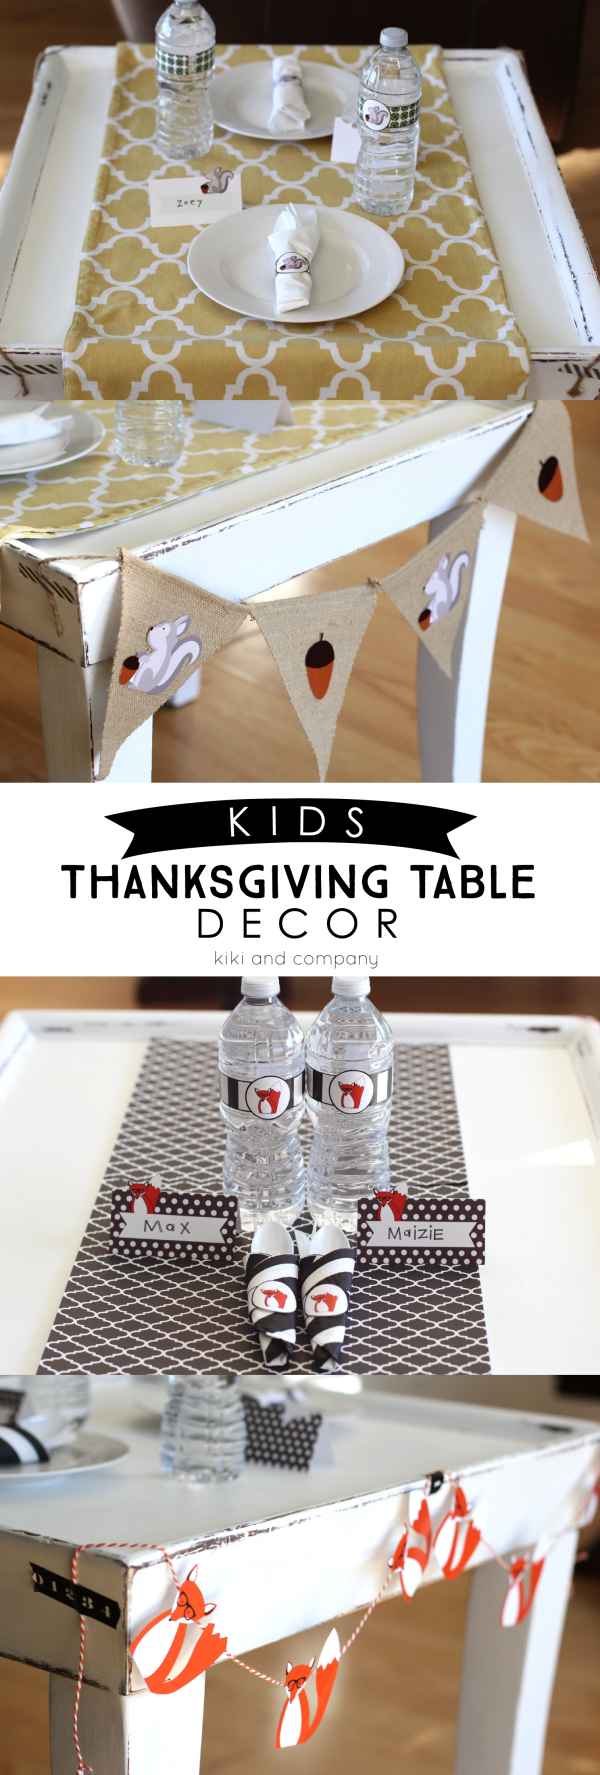 Kids Thanksgiving Table Decor  from kiki and company